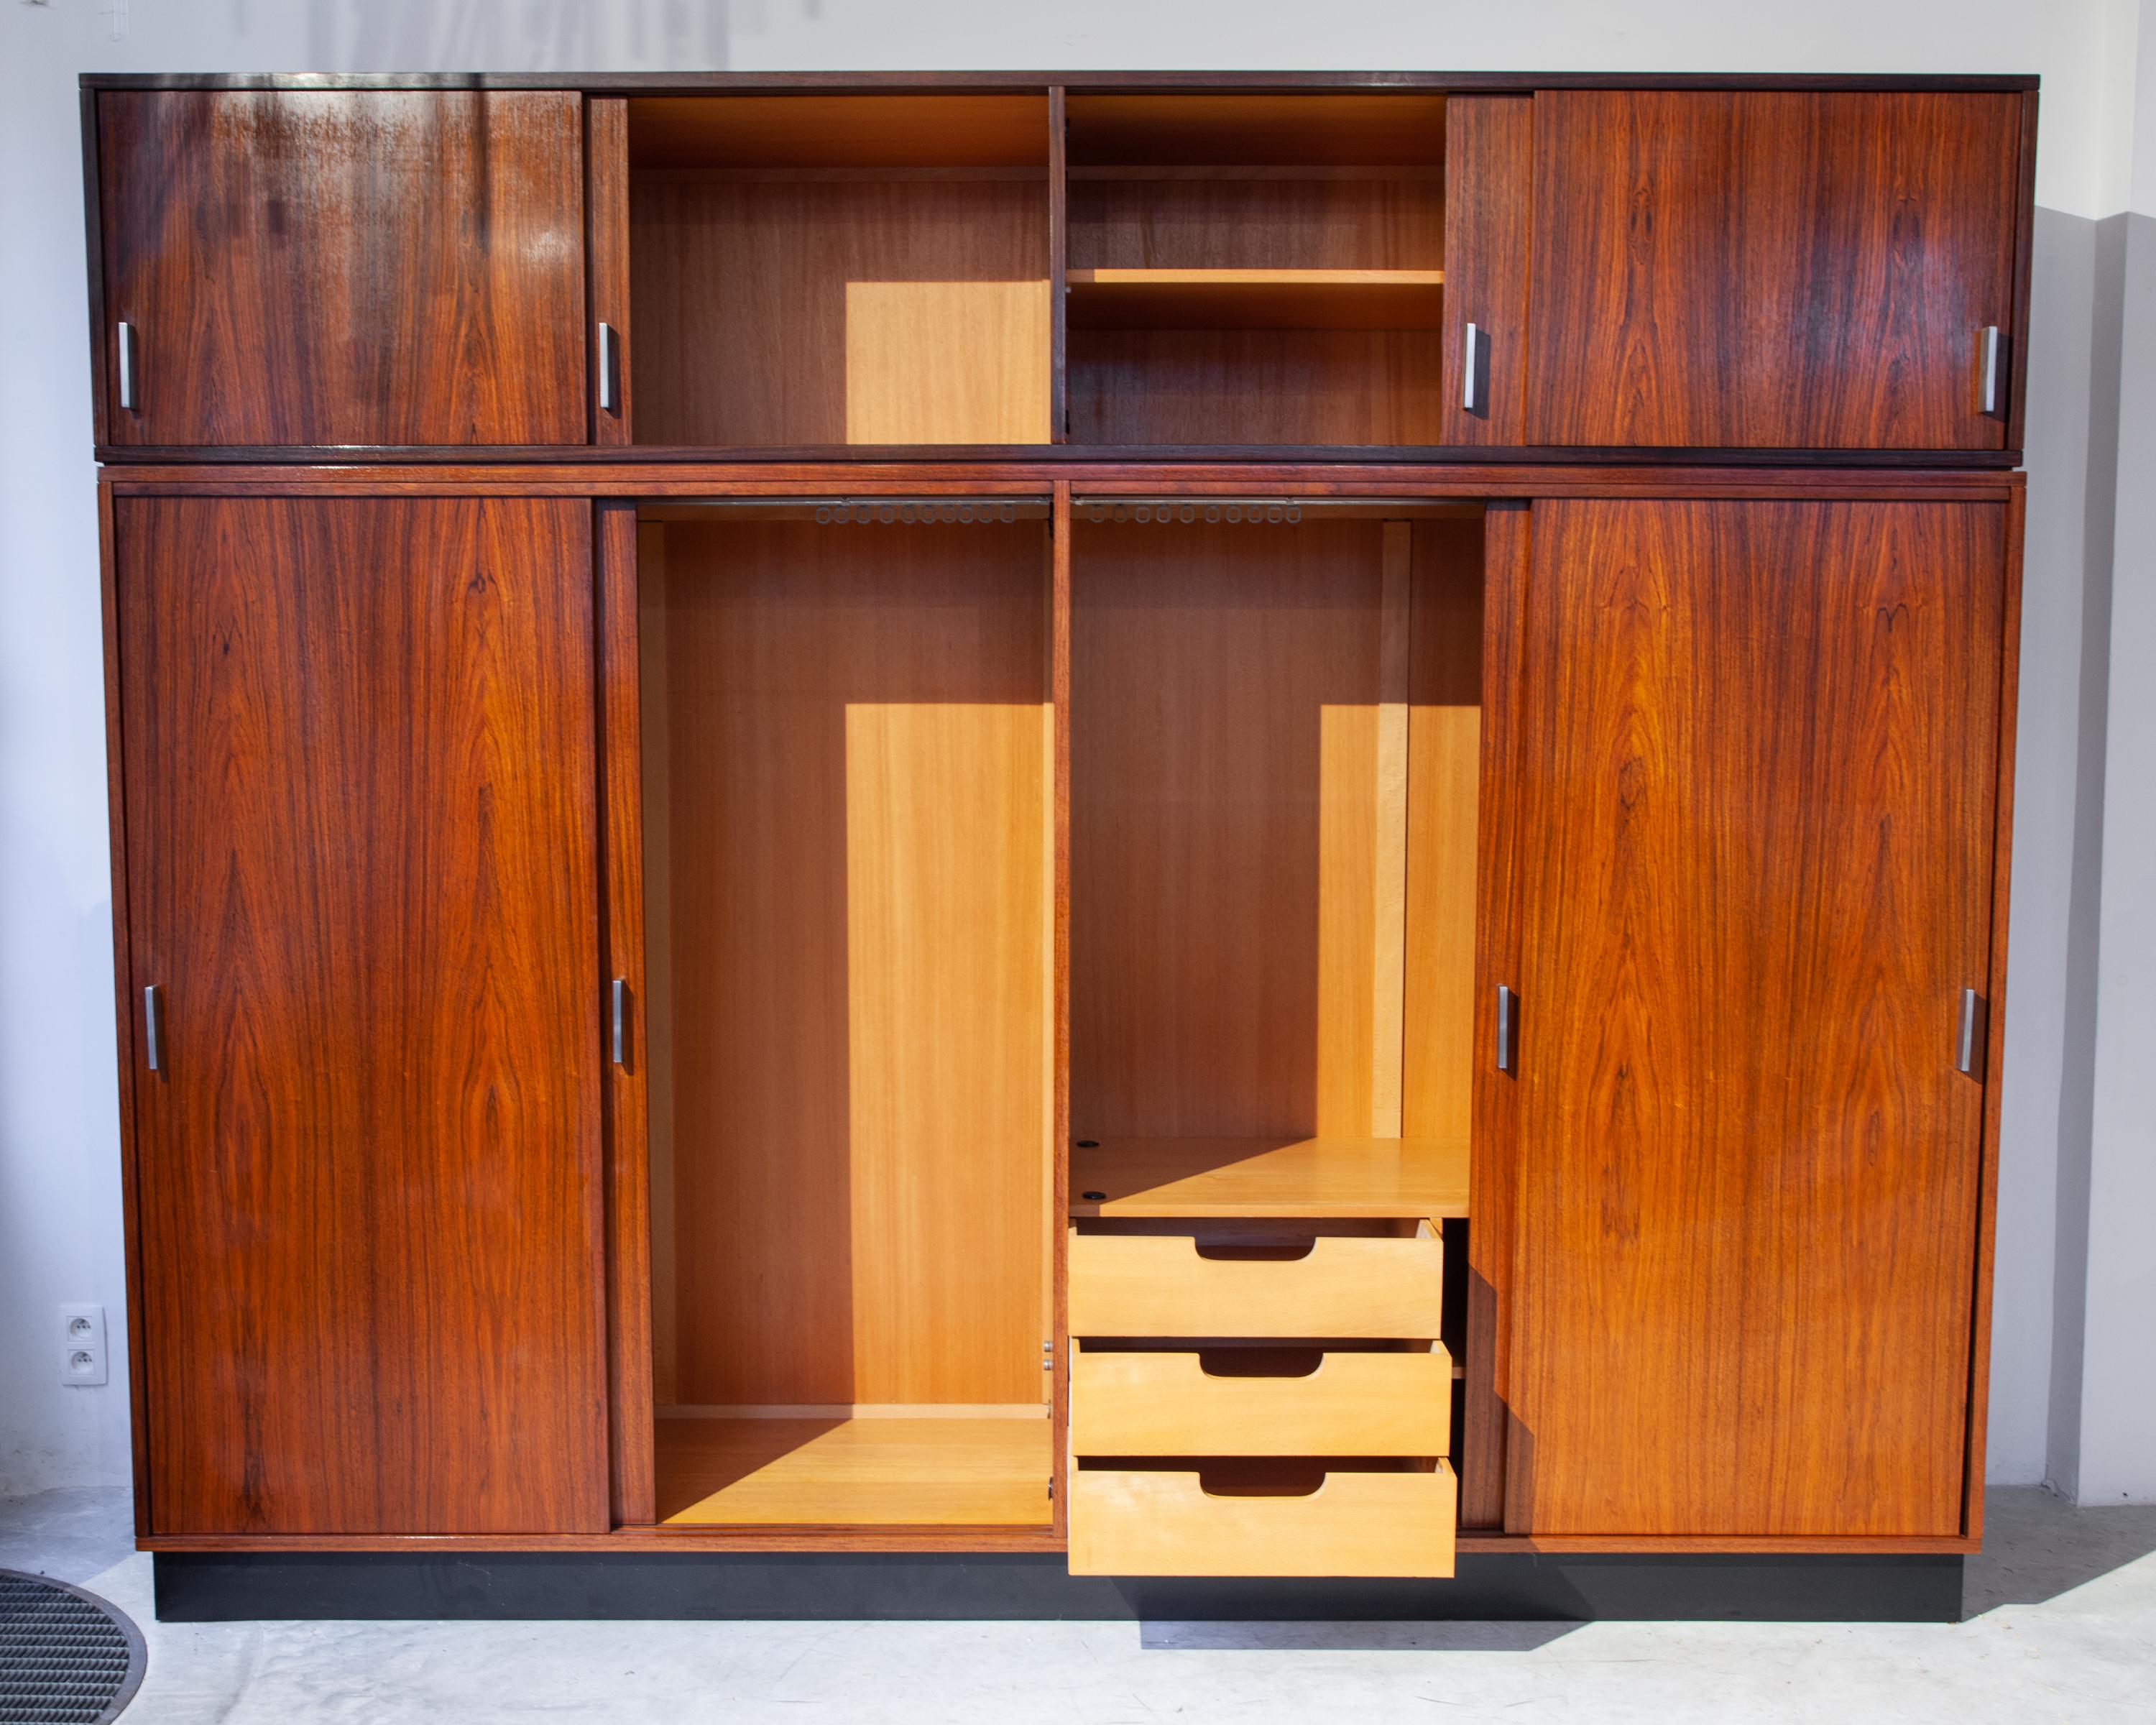 Handcrafted walnut wardrobe a beautiful masterpiece by Alfred Hendrickx for Belform. Two hanging closet compartments, three drawers and an upper cabinet with shelves. The doors have stylish silver handles and slide smoothly on thier tracks. Can be